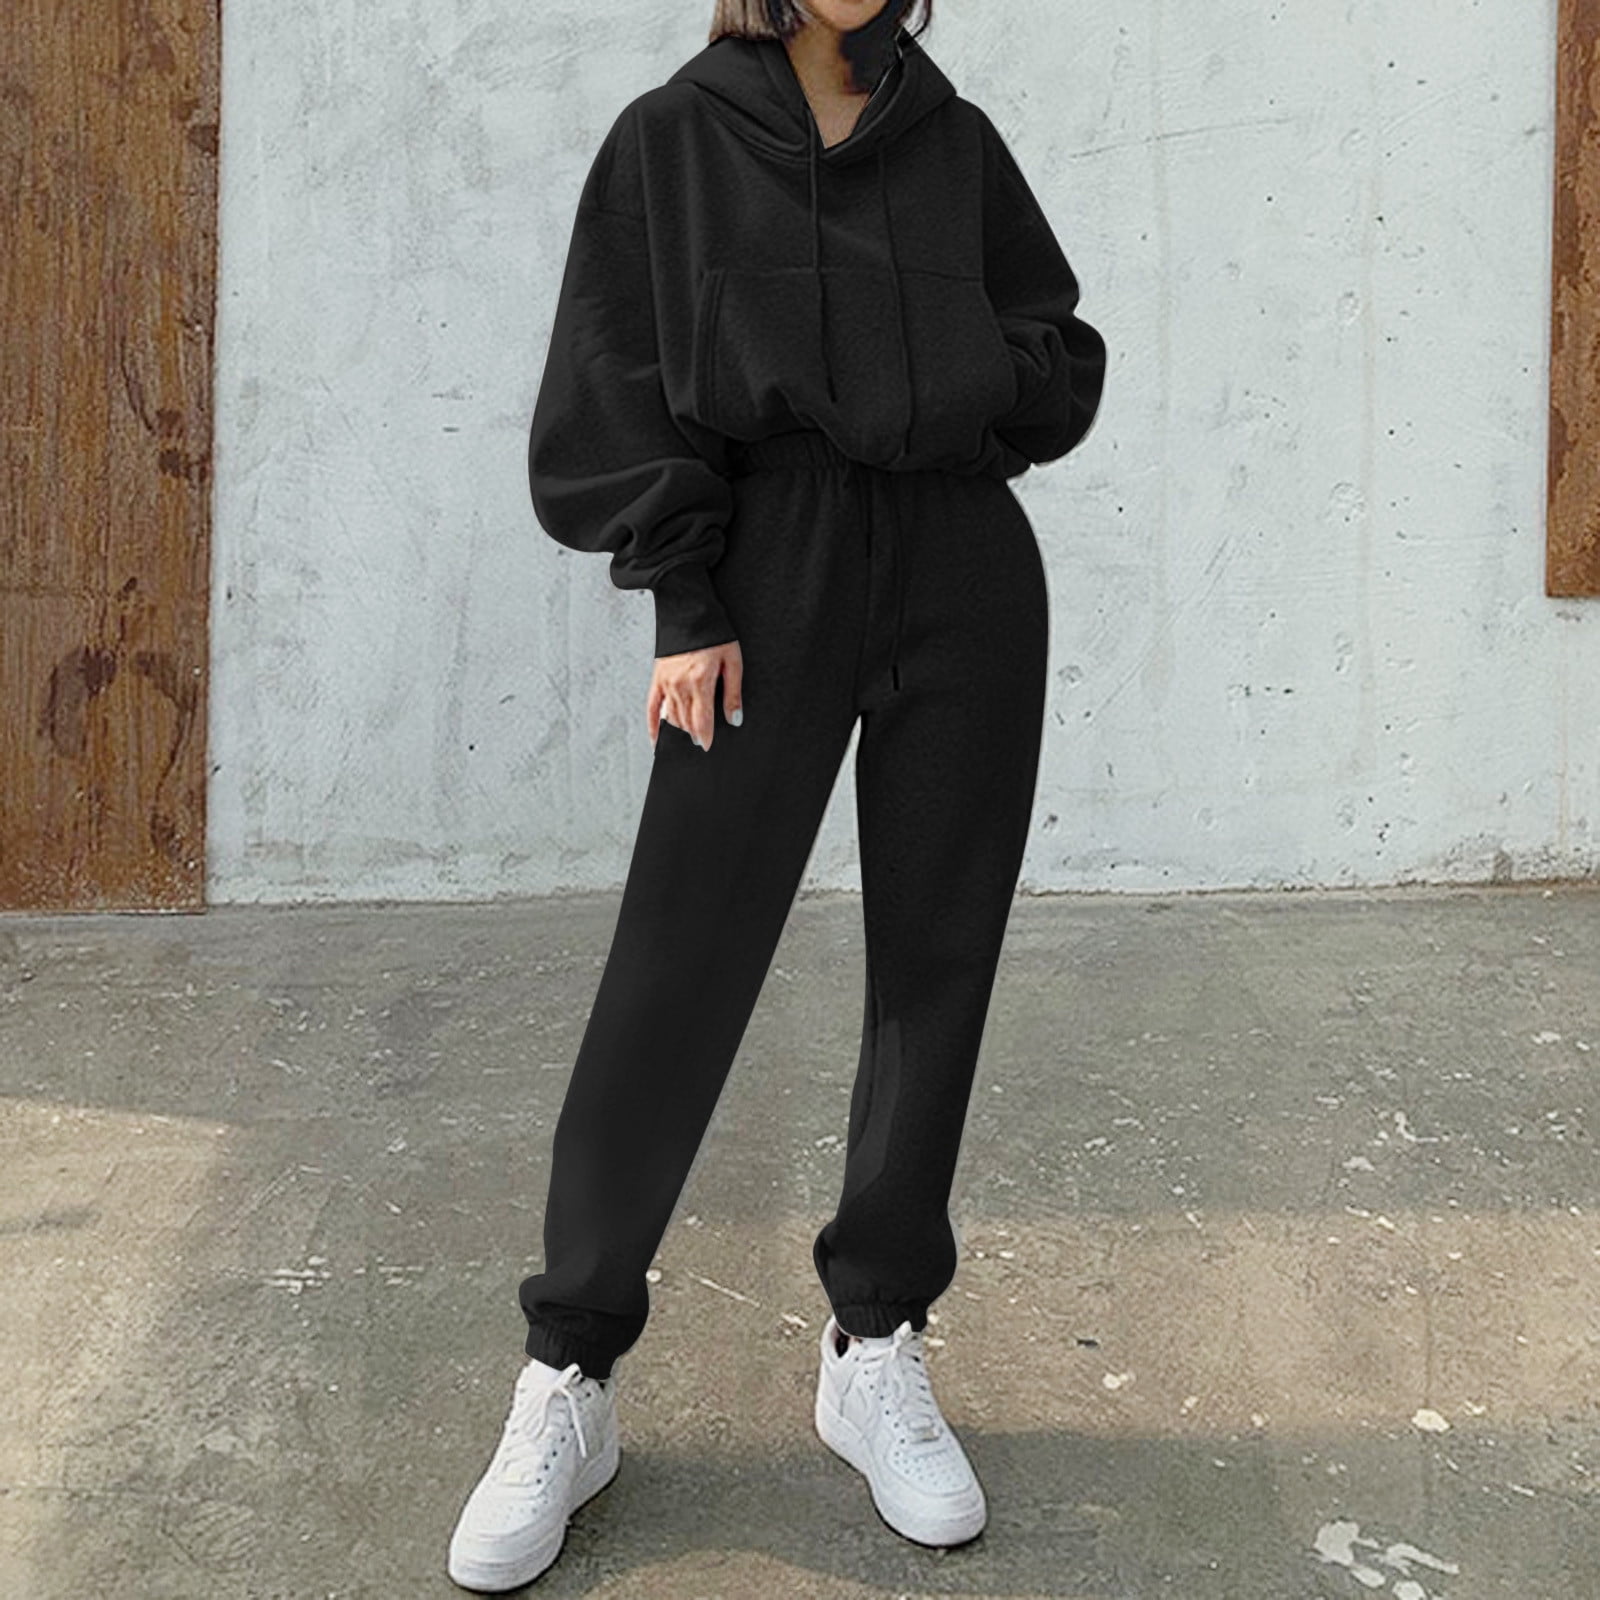 Pgeraug Pants for Women Hoodies Suit Winter Solid Tracksuit Set Sports  Sweatshirts Pullover Home Sweatpants Outfits Jumpsuits for Women Black L 